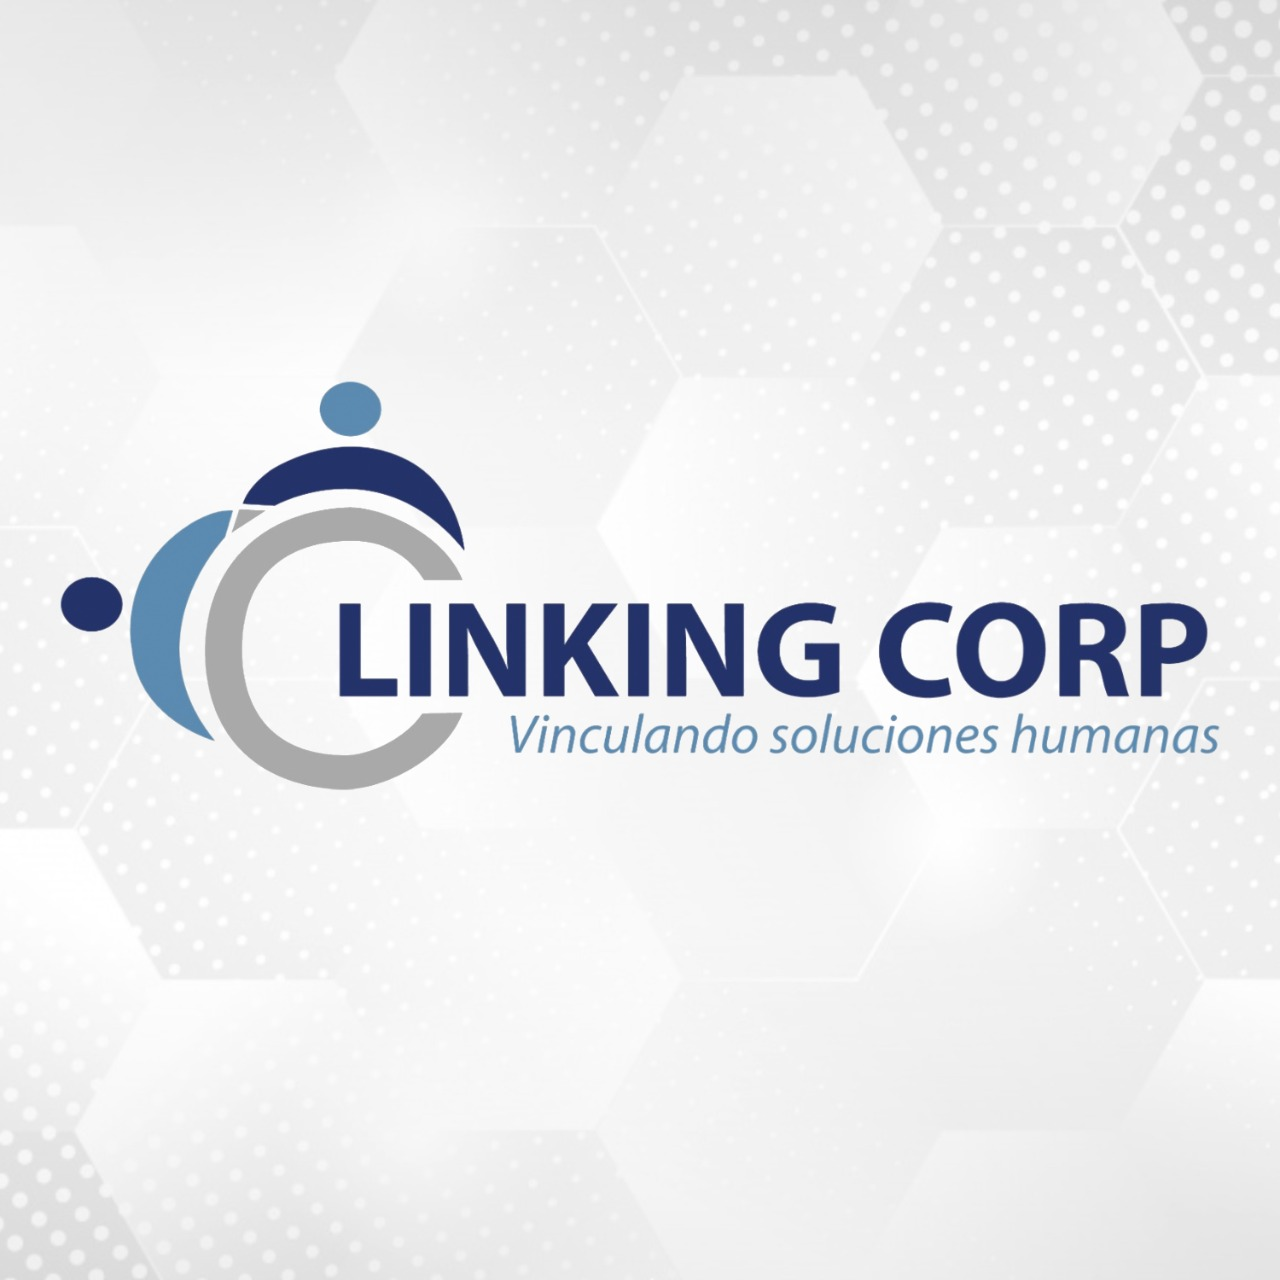 Linking Corp